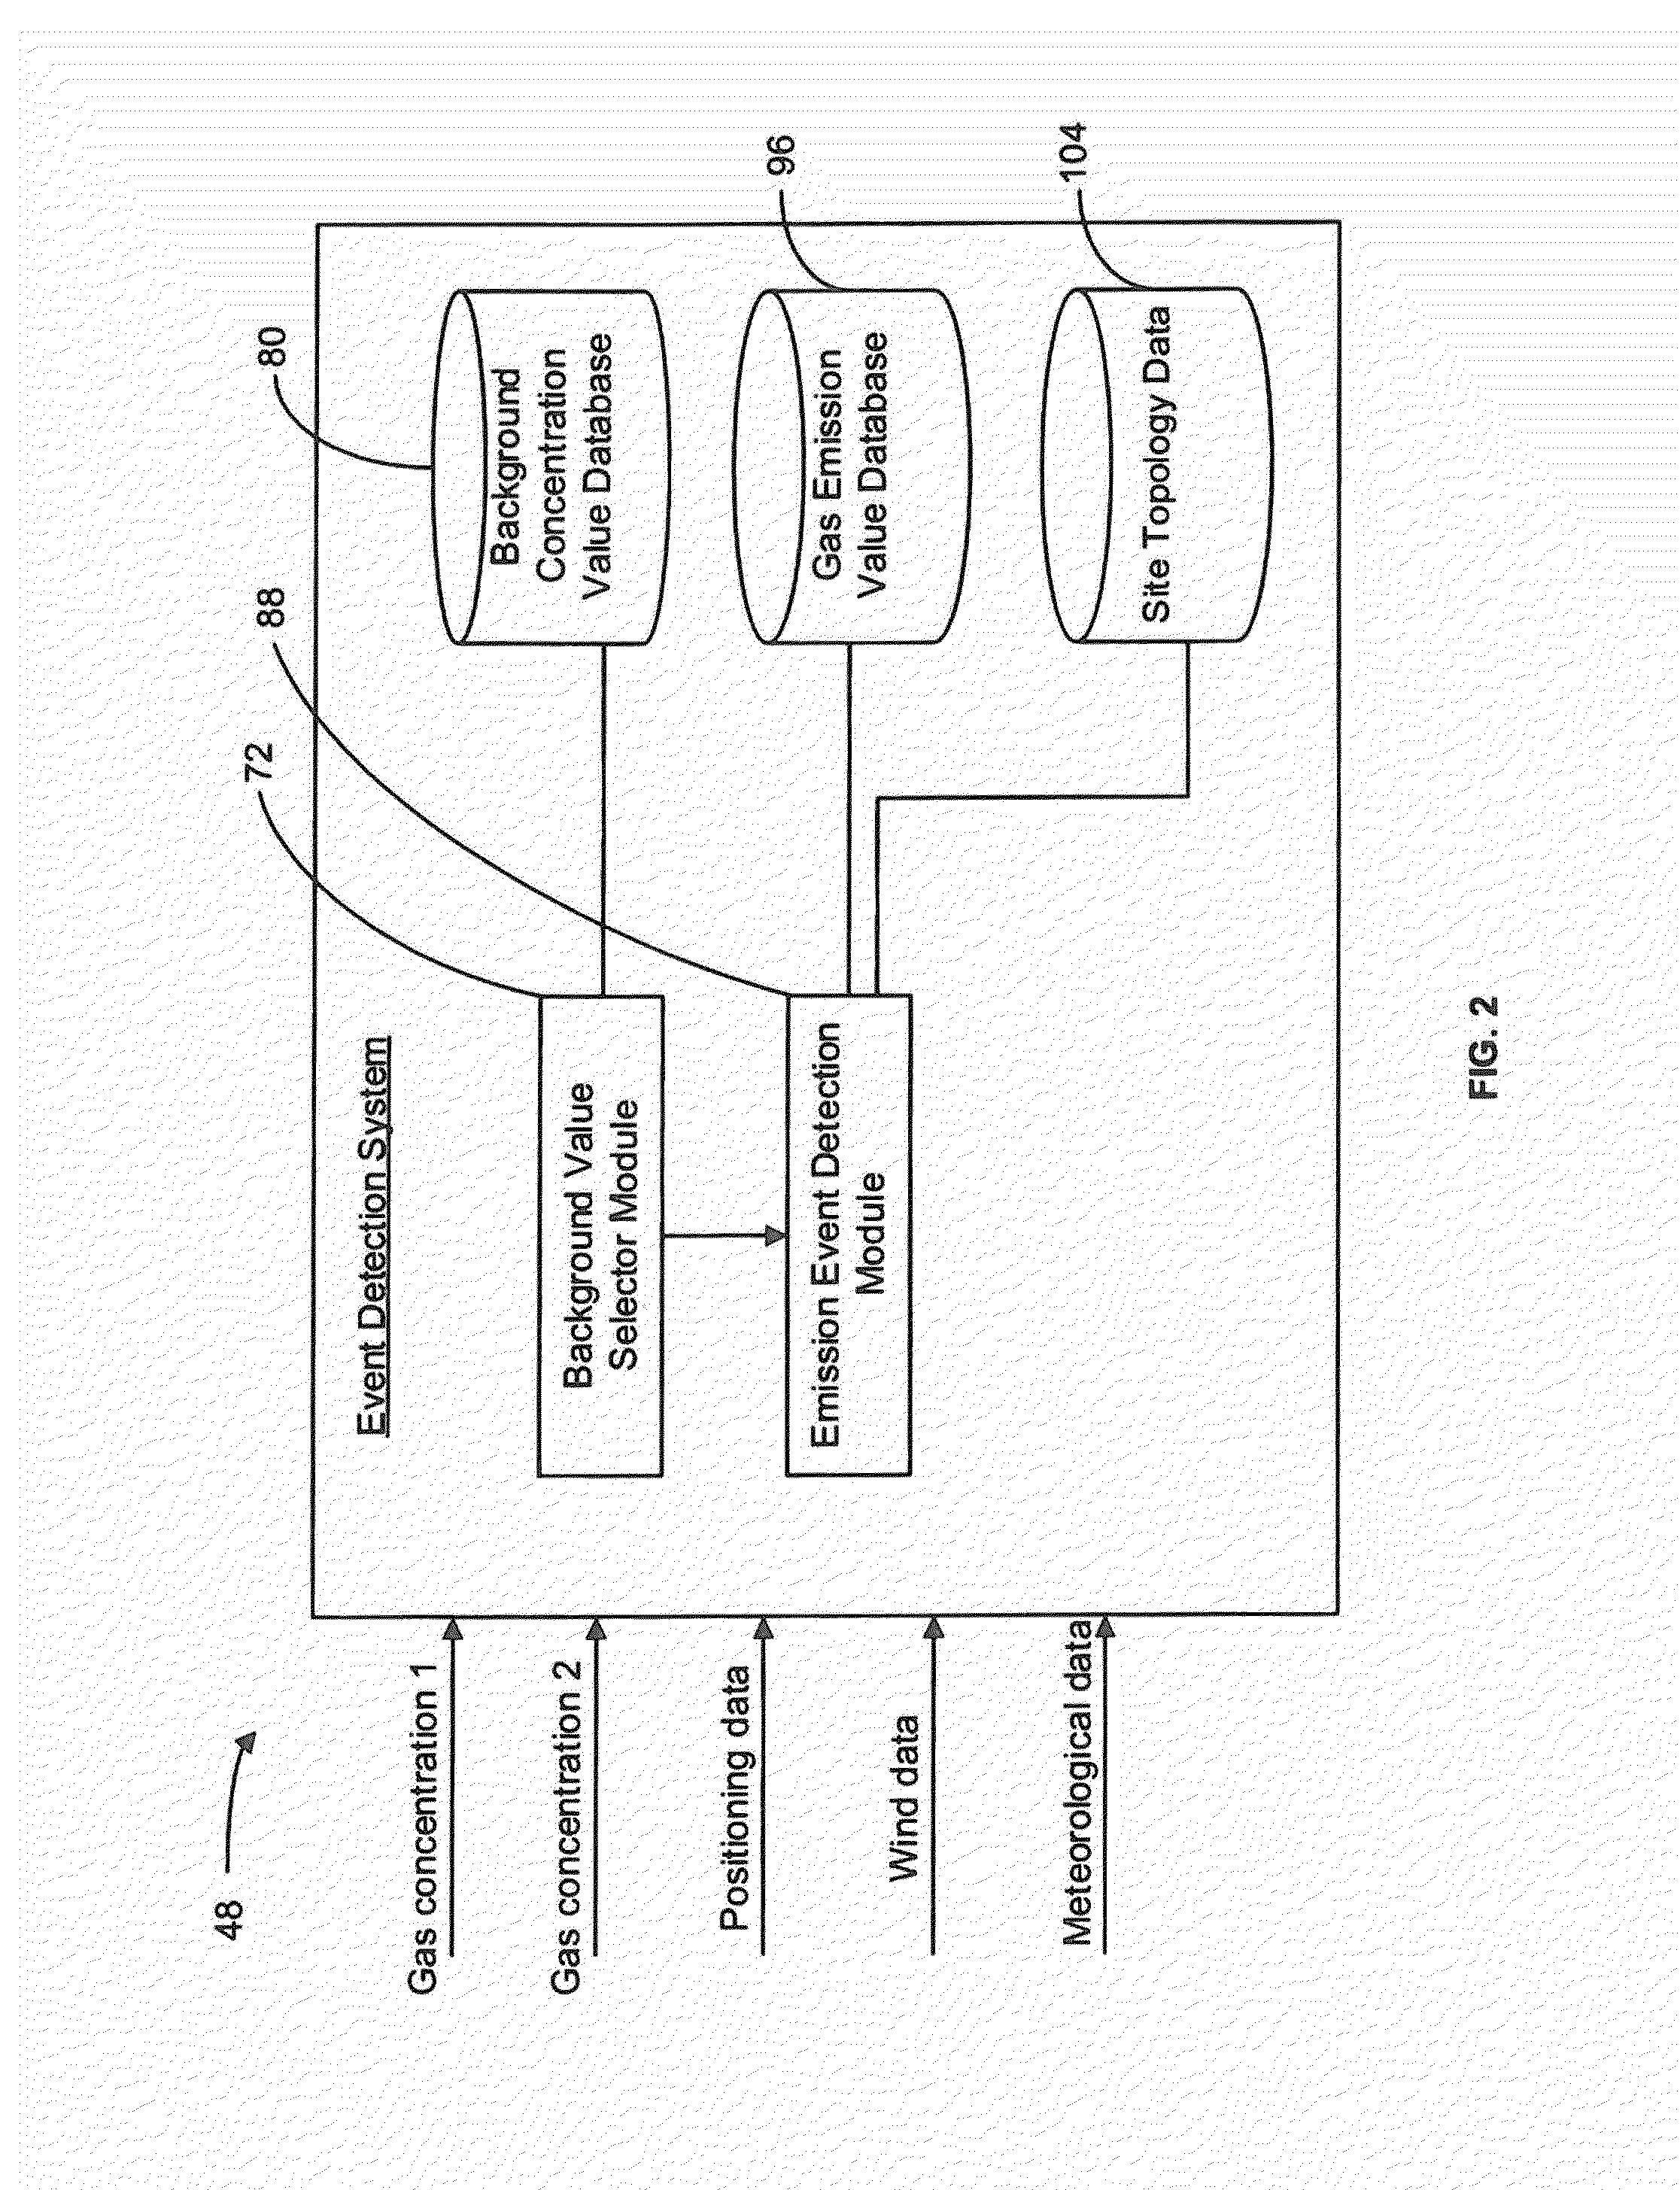 Gas emission detection device, system and method